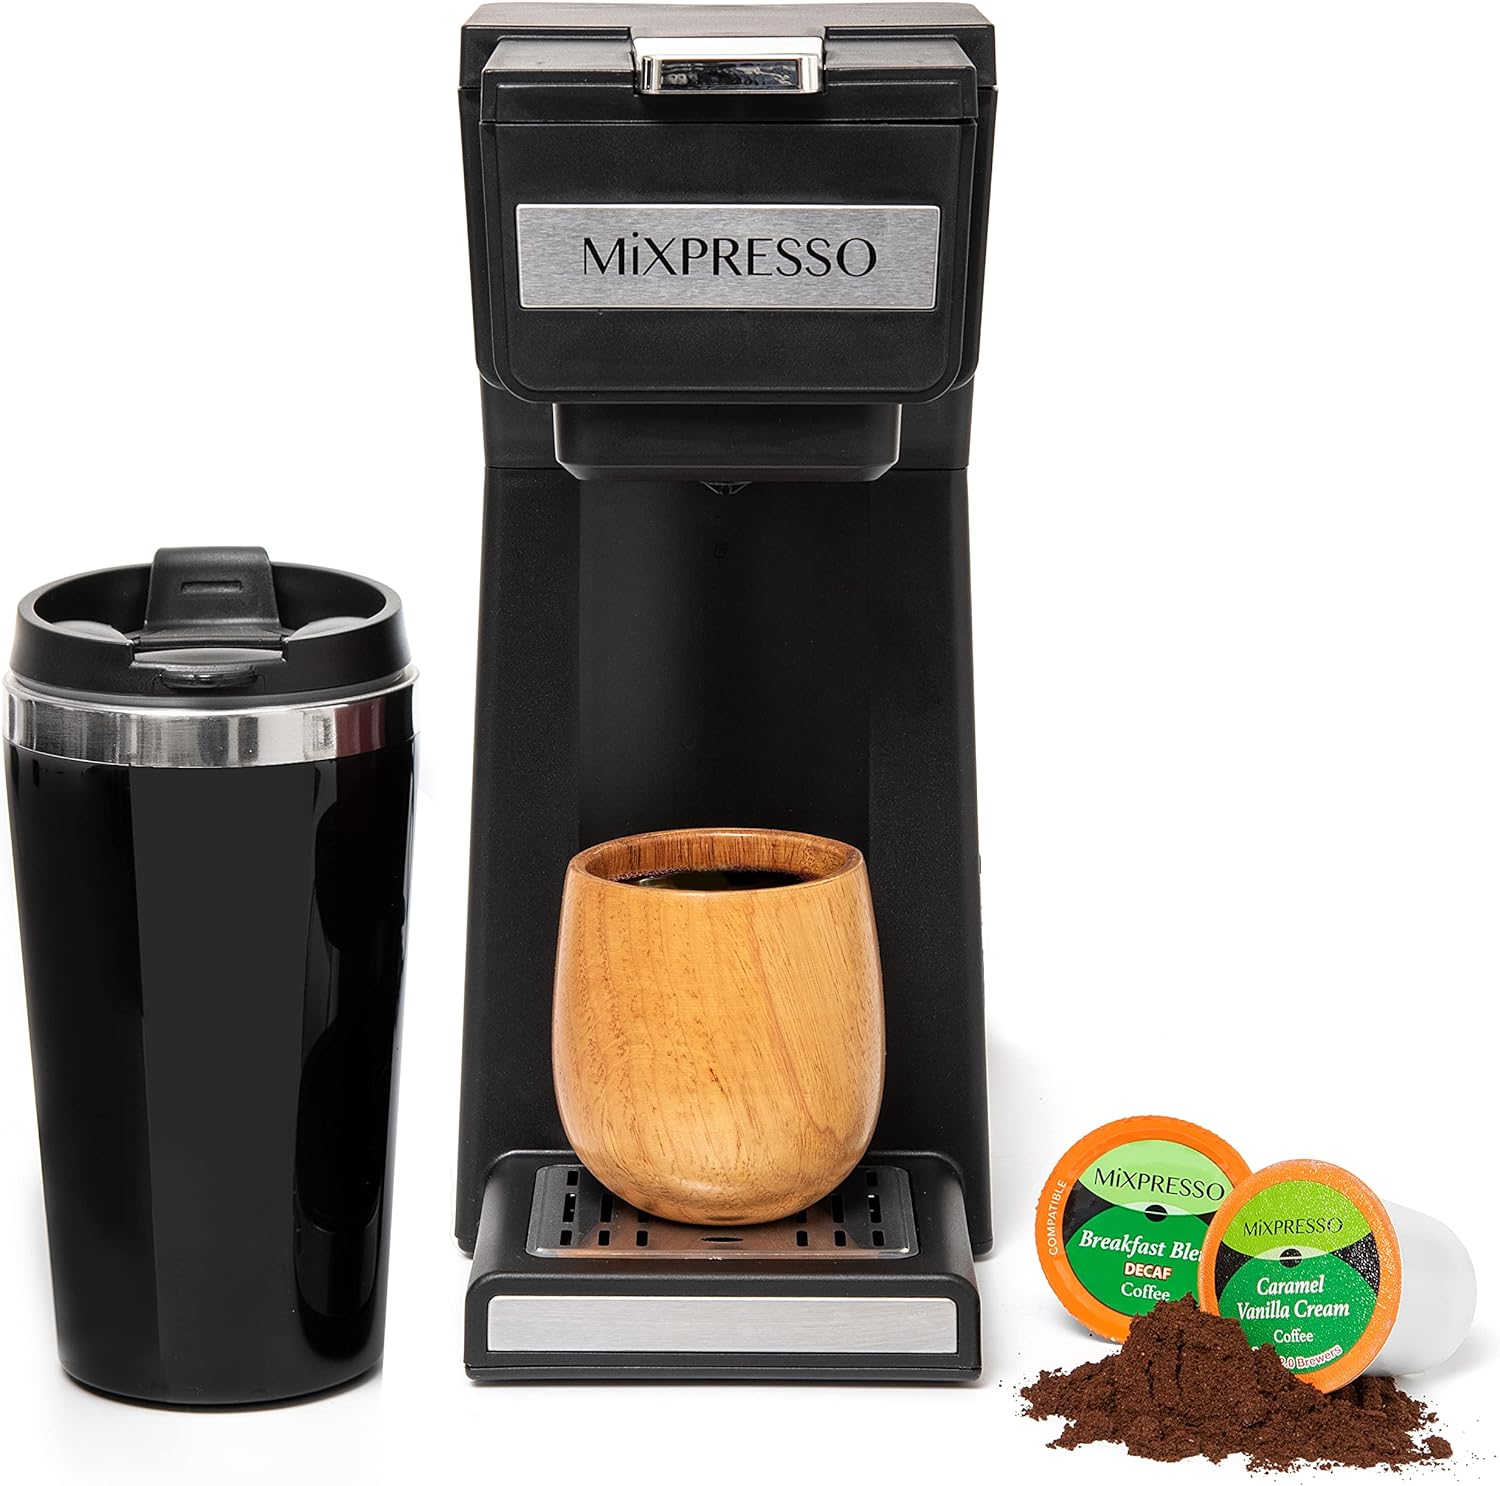 Screw on mug! Great for small space. Perfect for one person. The lid isn't super sturdy but with a bit of care you won't have any problems. Packaged good came in perfect condition. K cups are all I have used & with no issues! Very happy with this purchase